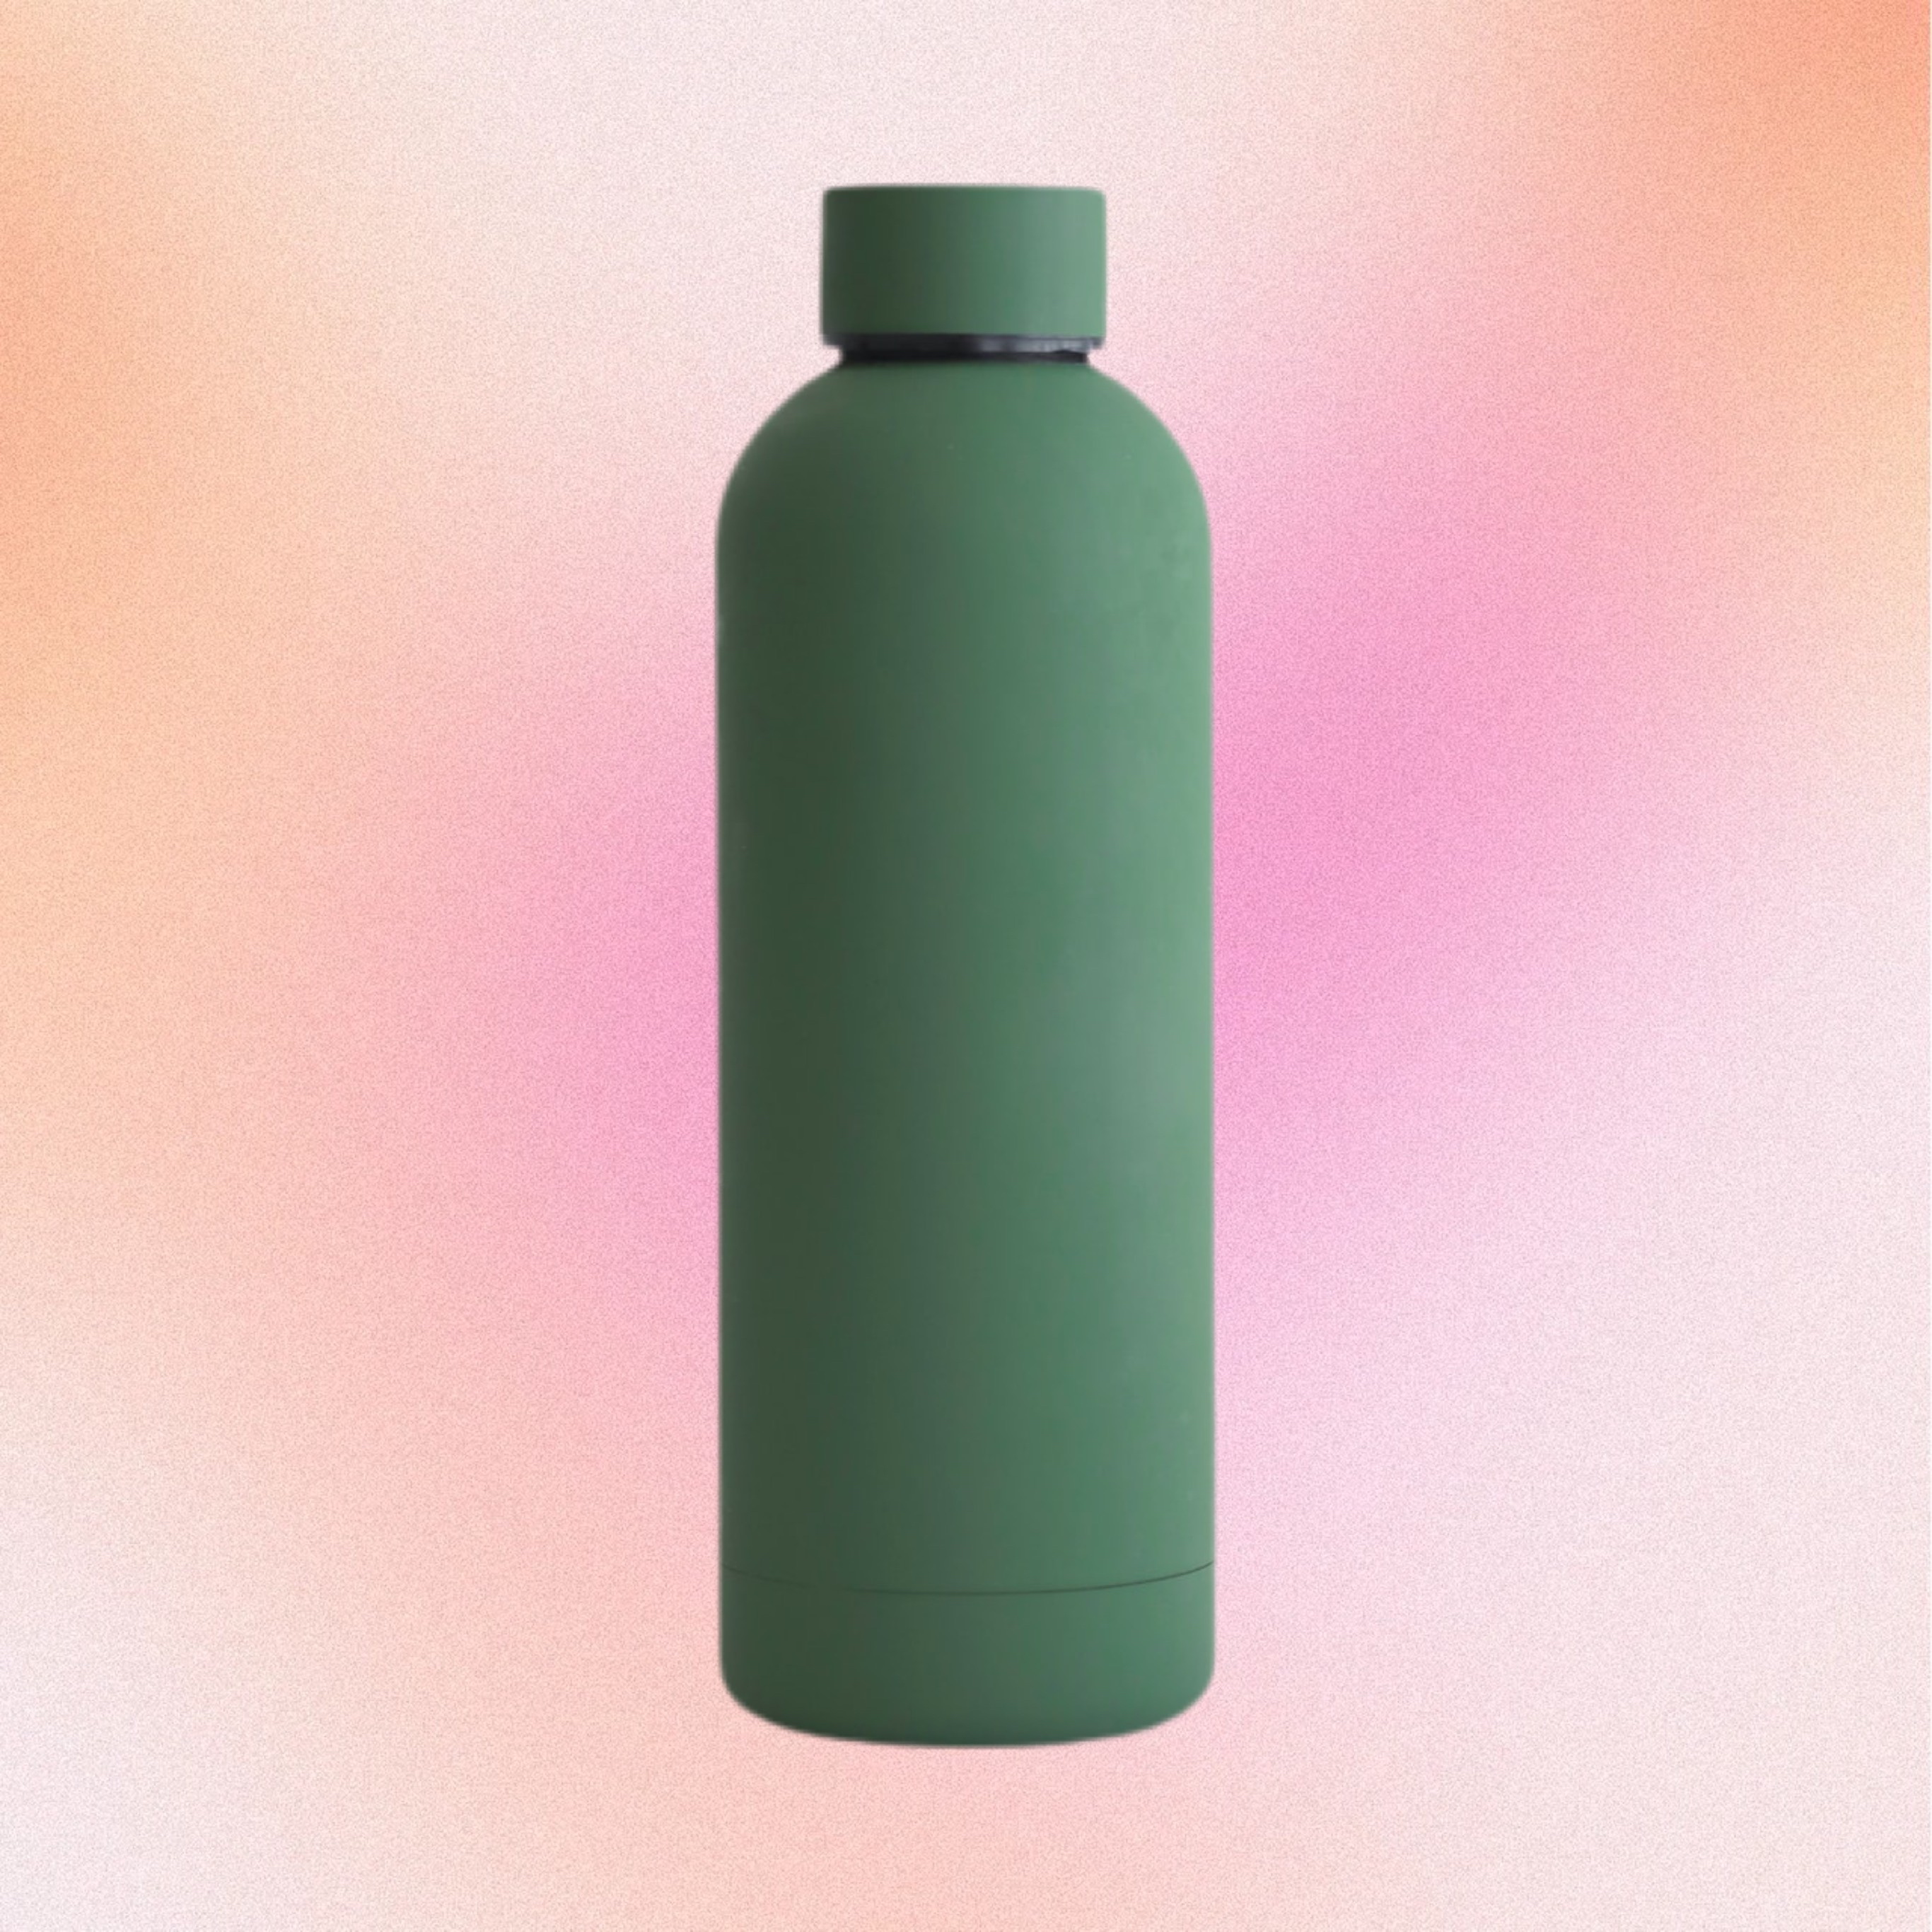 Green bottle on pink gradient background Magic template